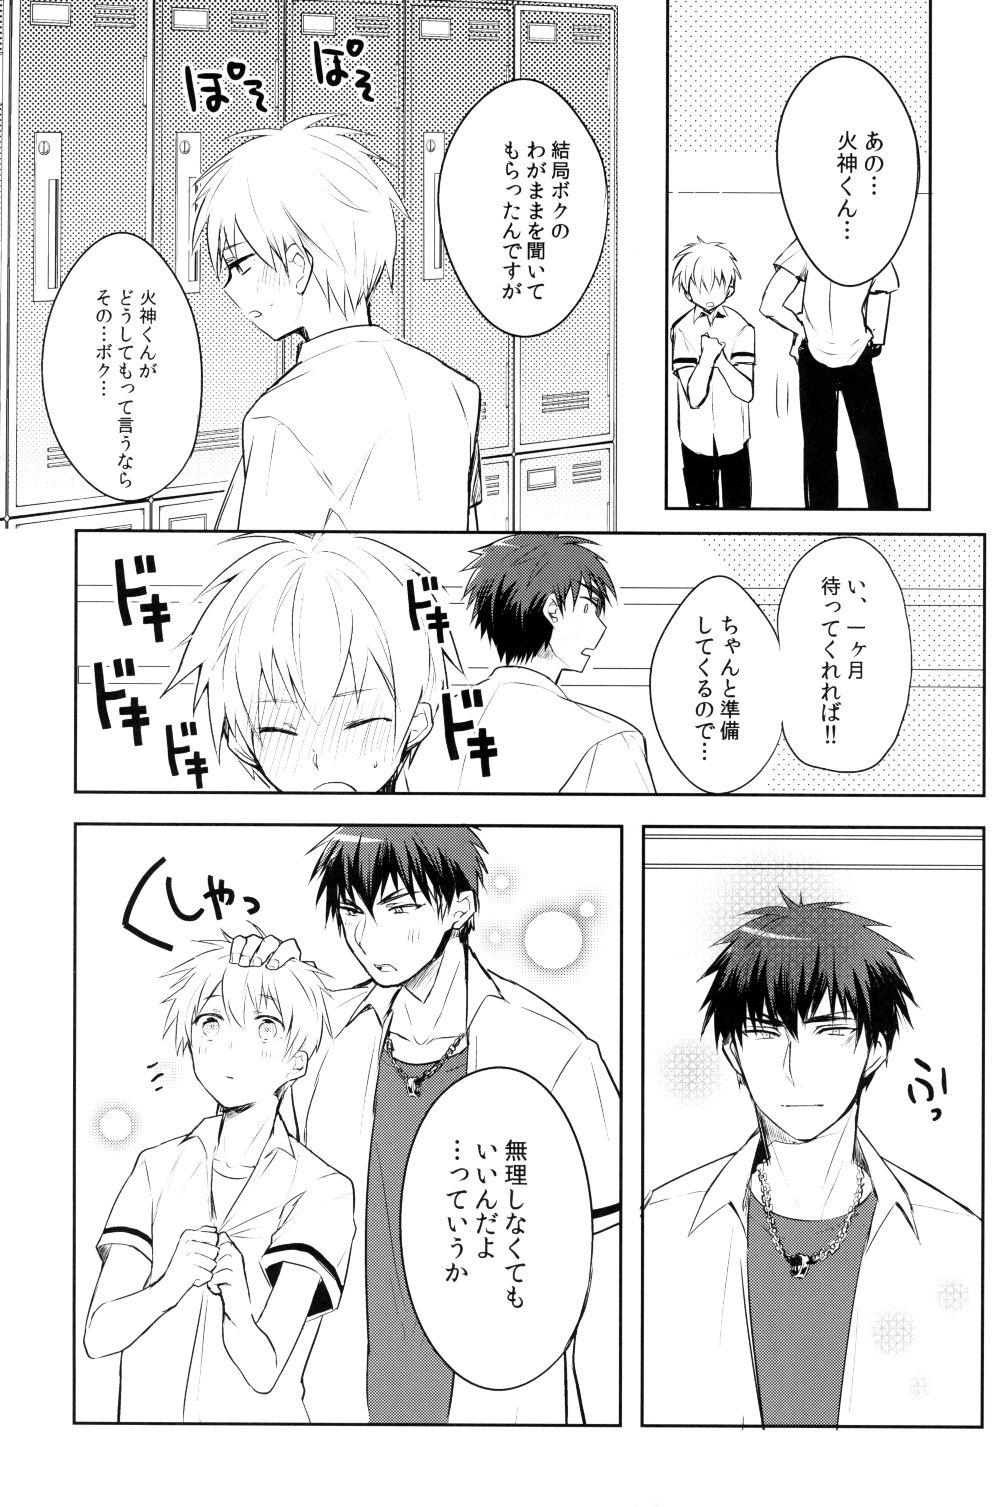 Kagami-kun's Thing is Amazing!! 25